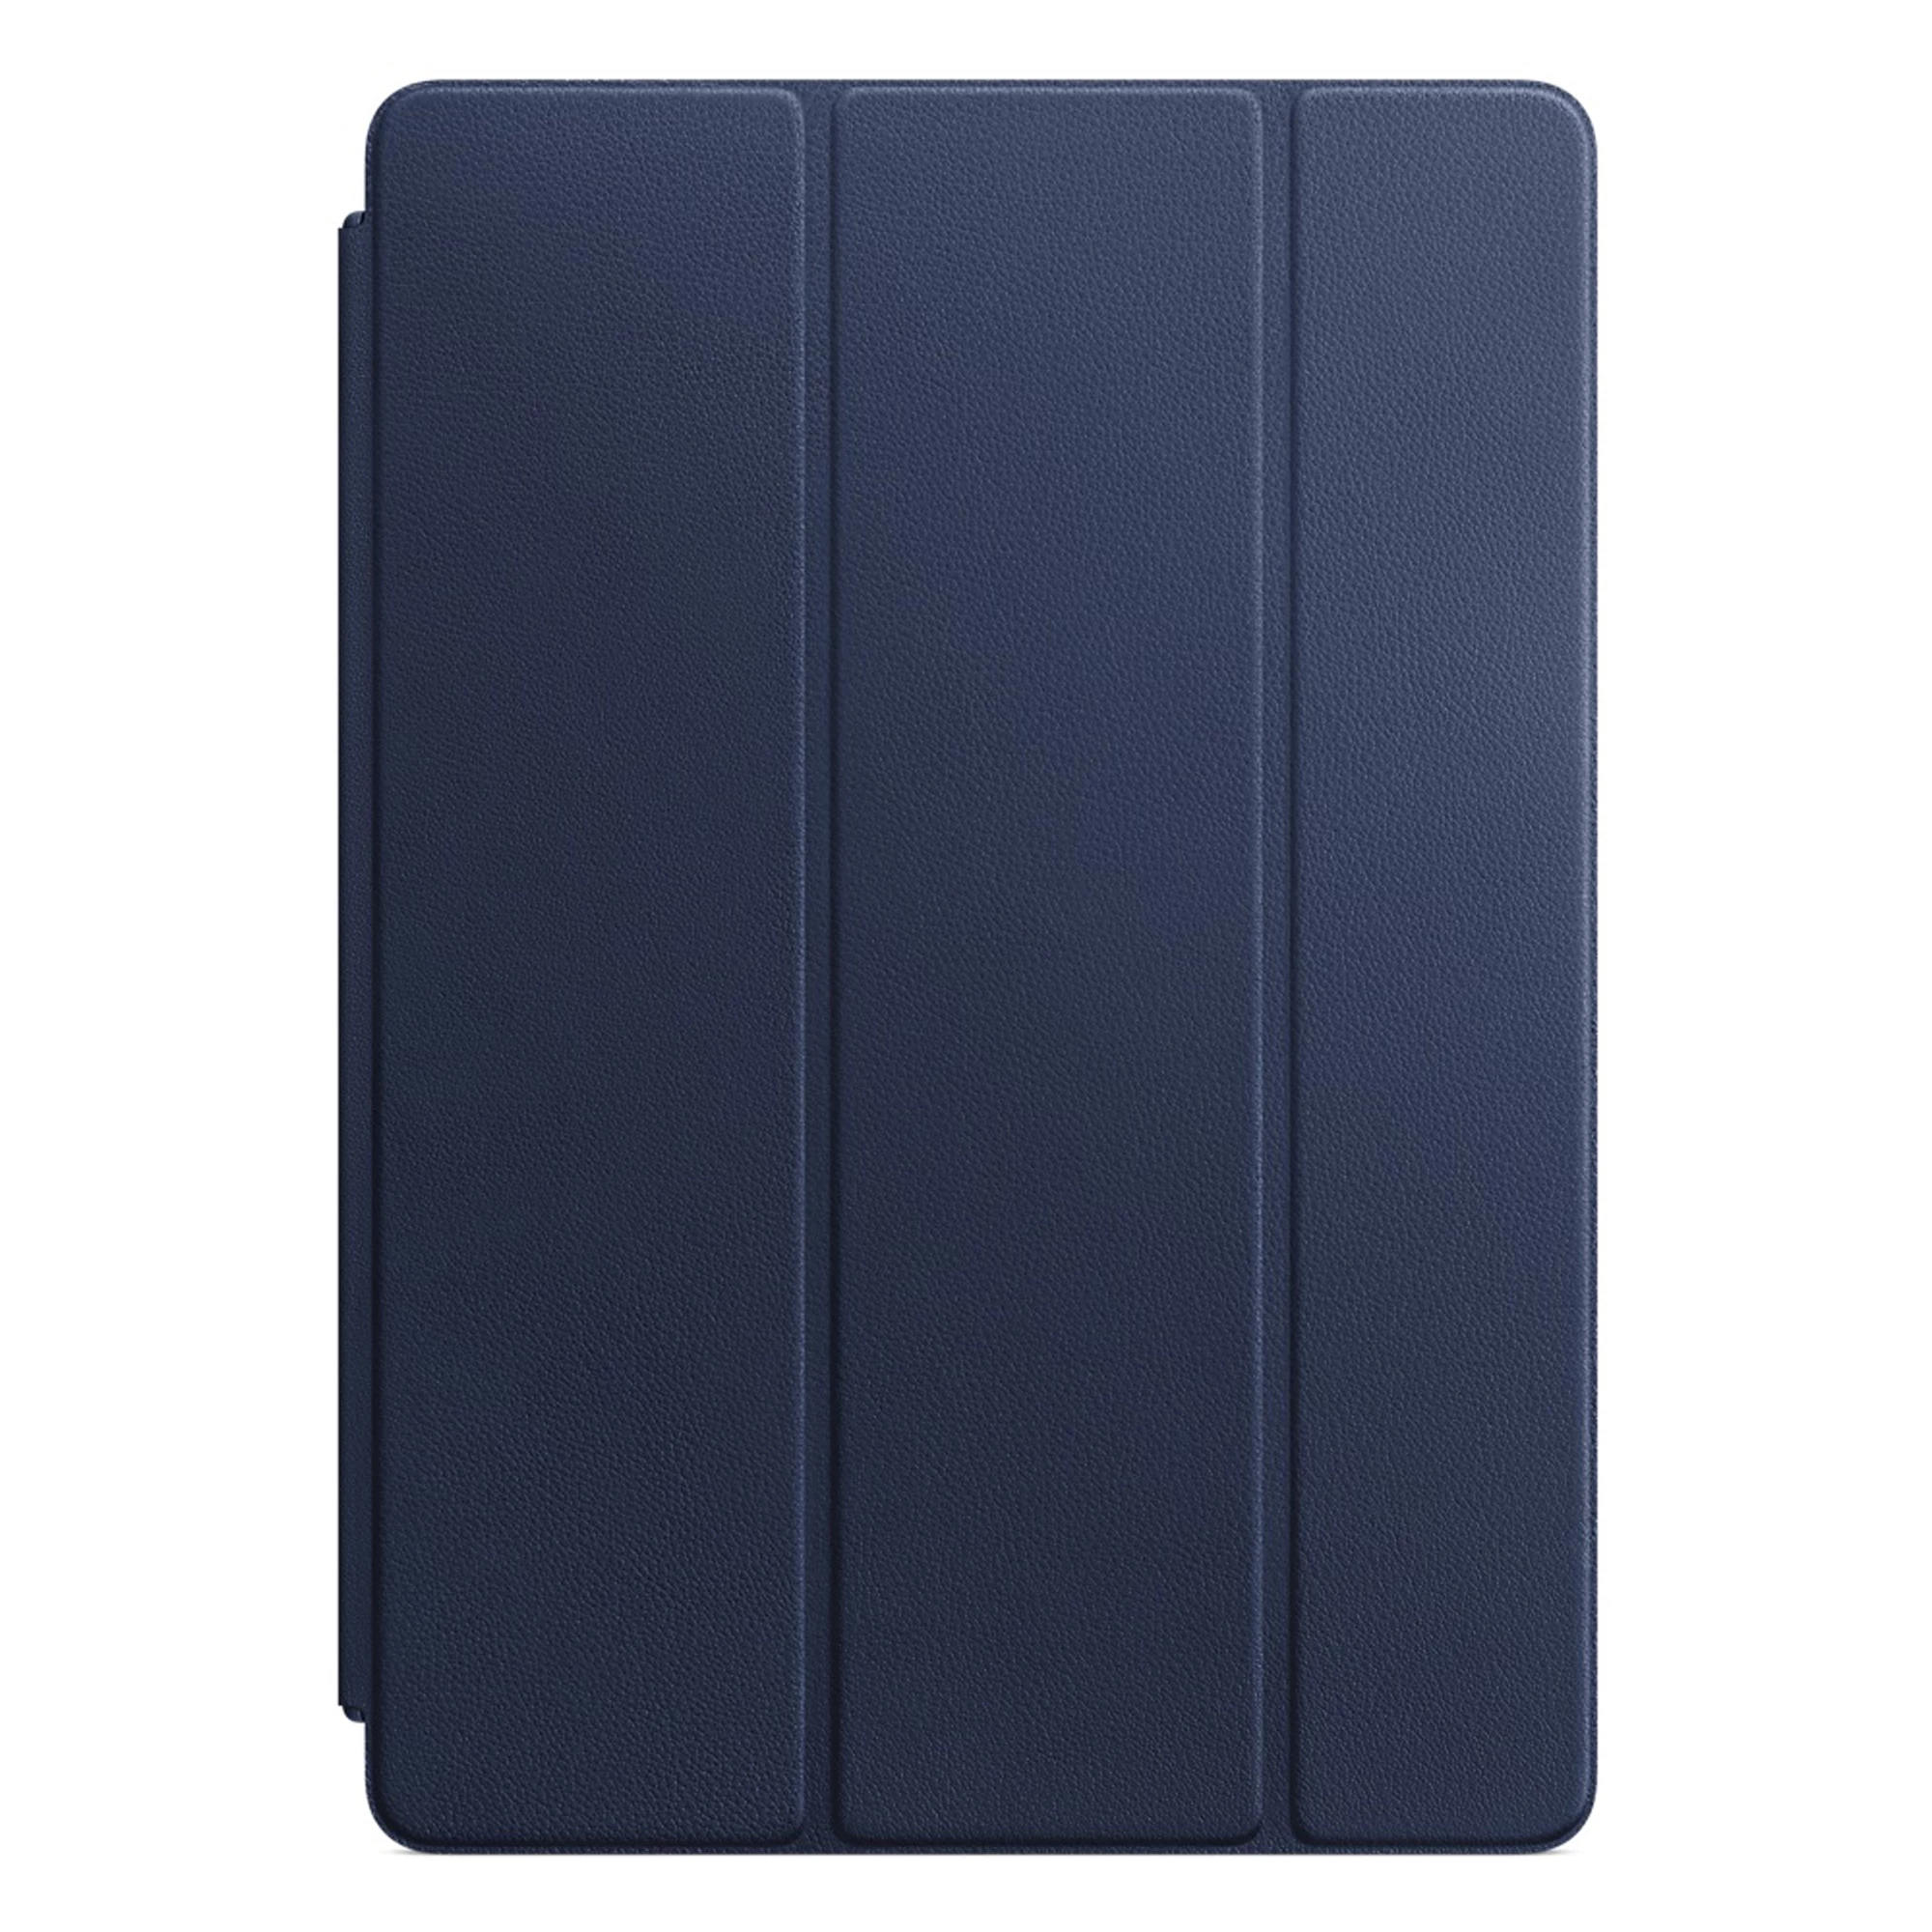 Apple Leather Smart Cover for iPad 10.2" / Air 3 / Pro 10.5" - Midnight Blue (MPUA2)